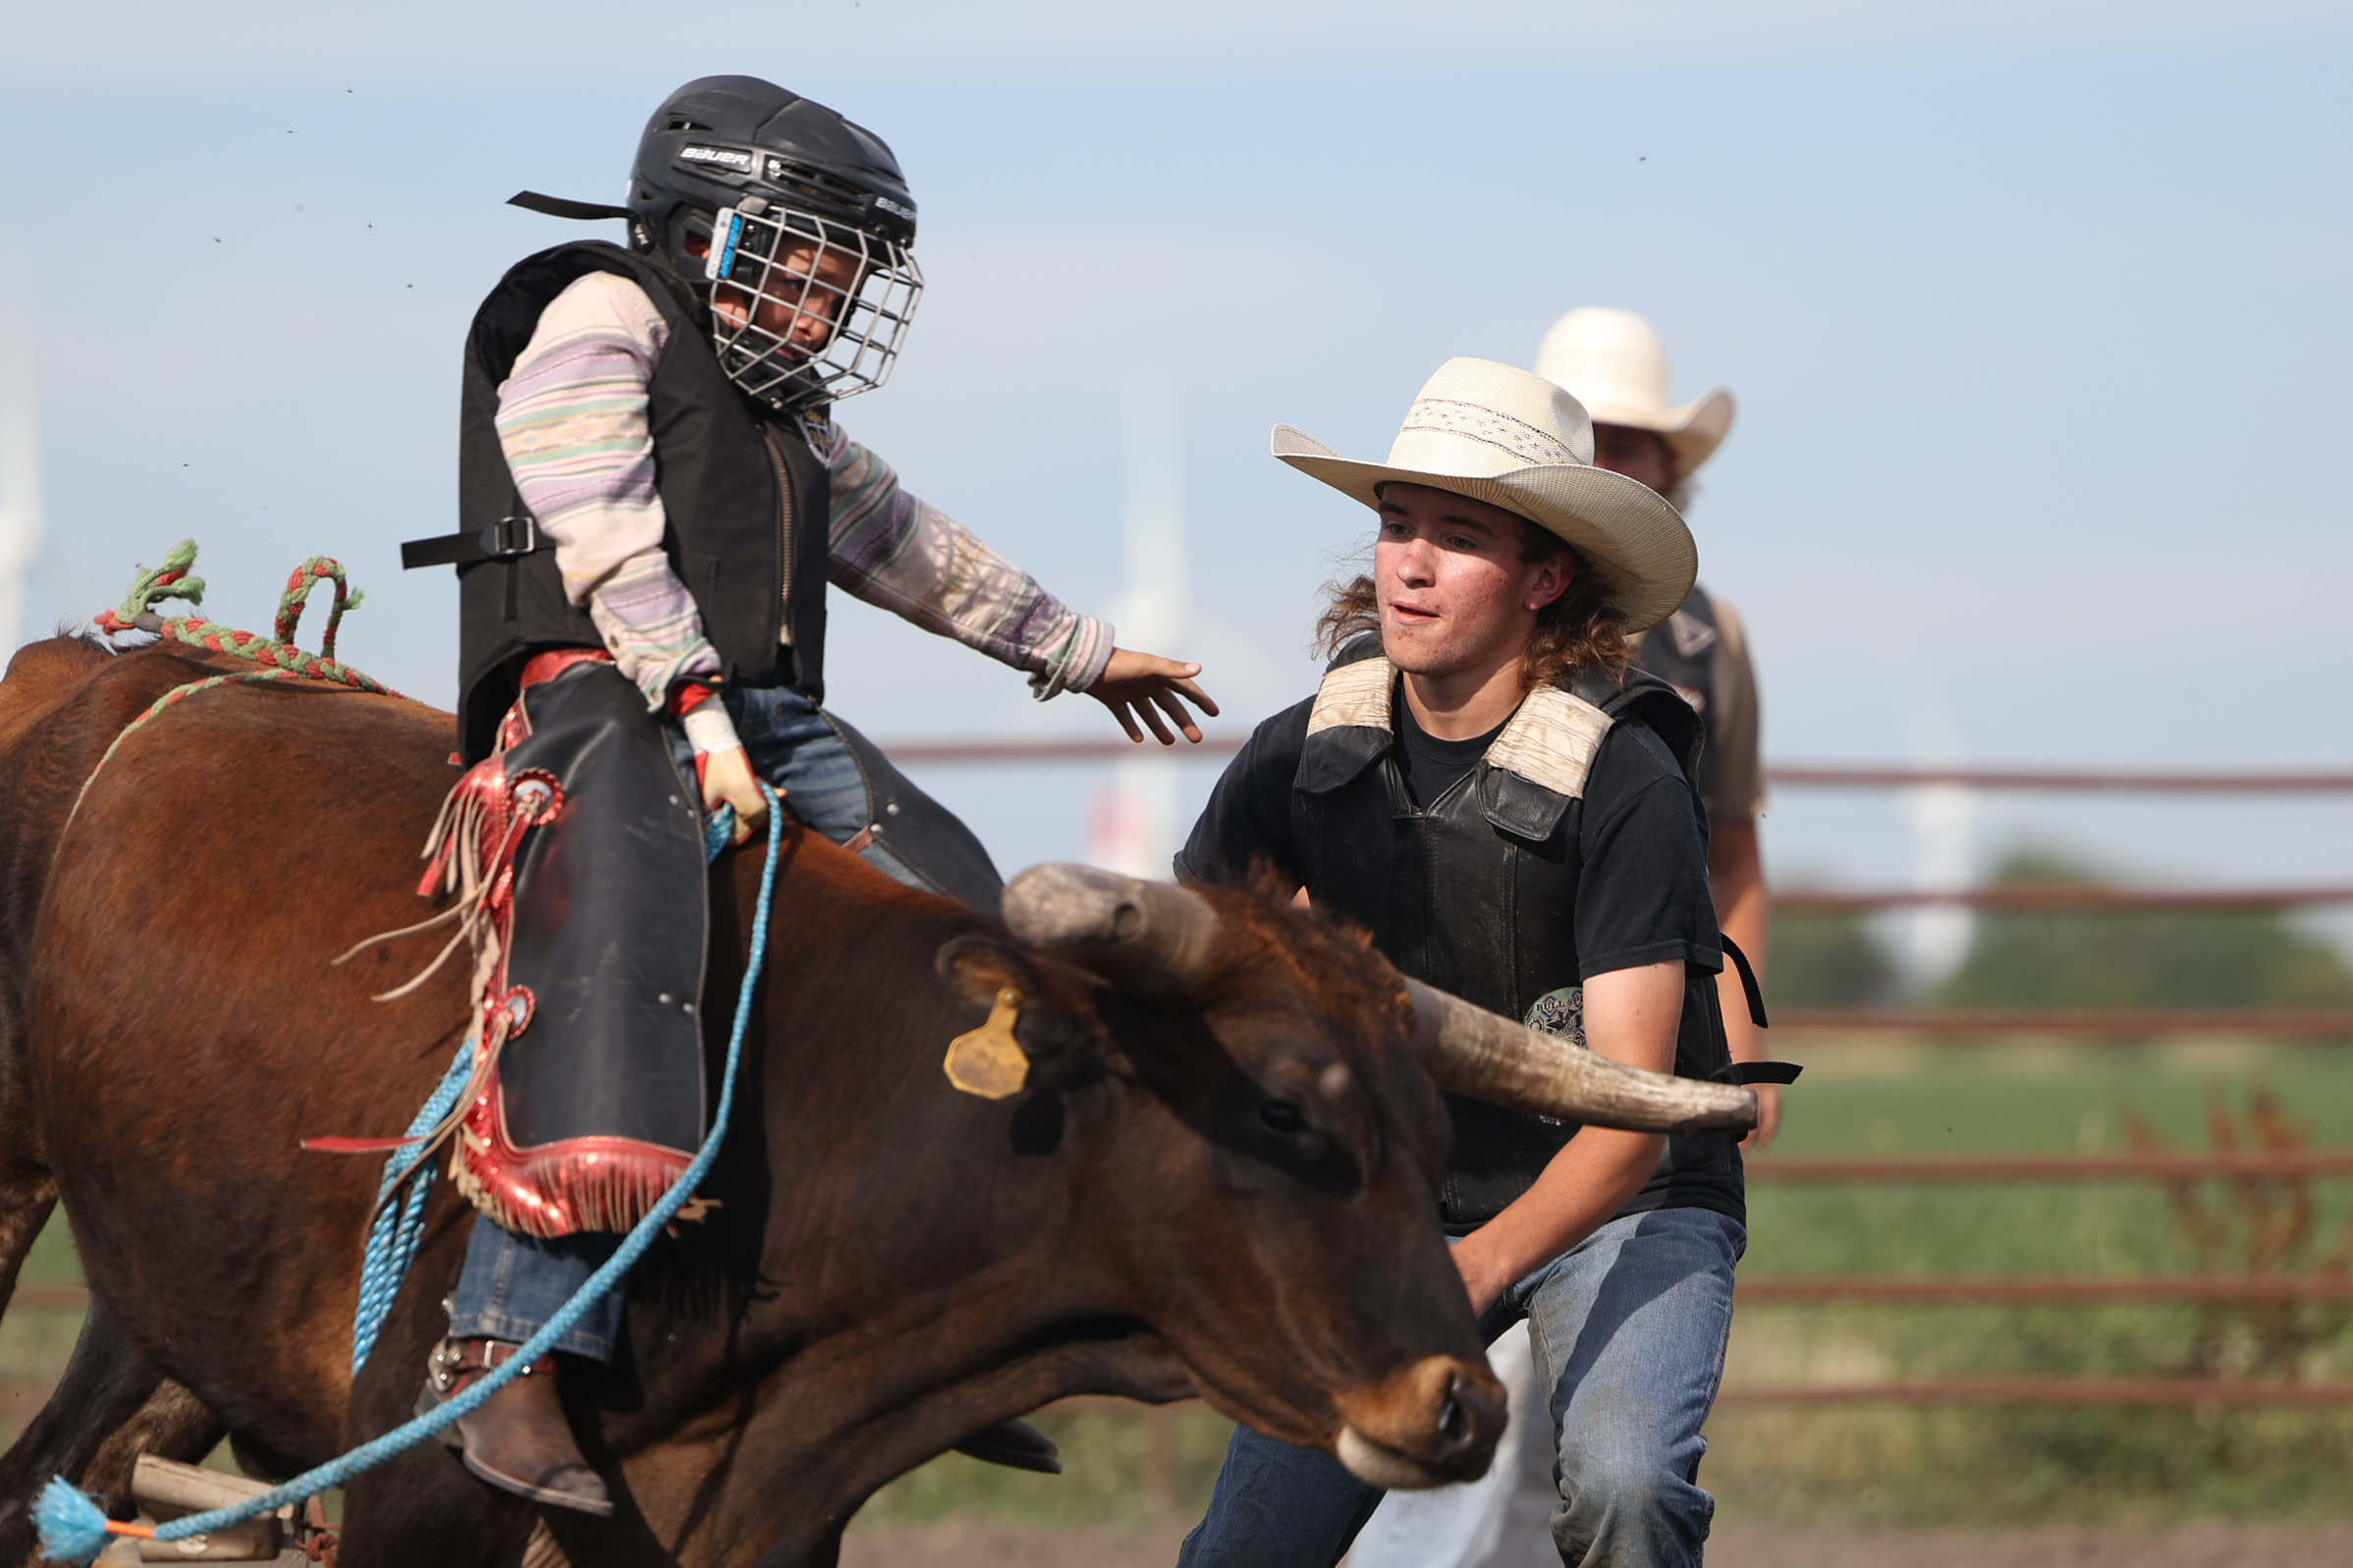 Morris teen heads to national bull-riding rodeo competition July 17